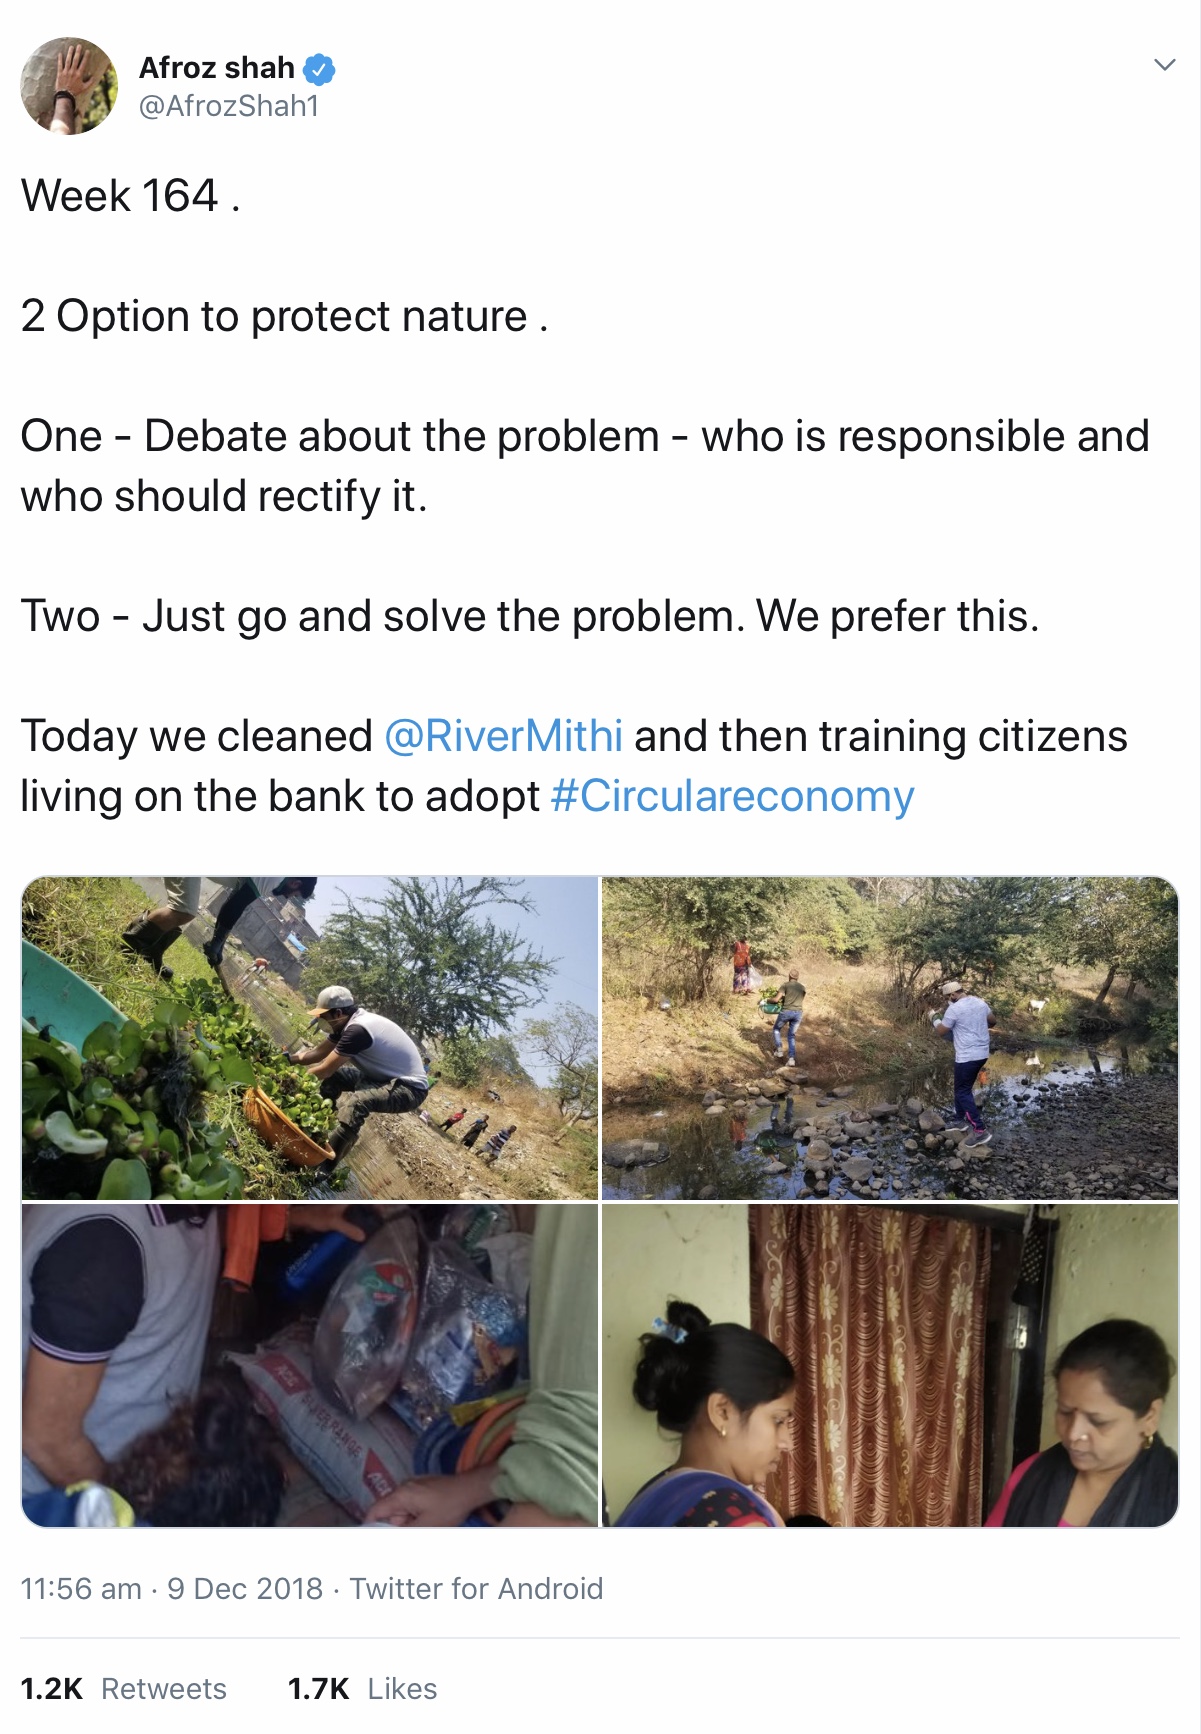 “2 Option to protect nature. One - Debate about the problem - who is responsible and who should rectify it. Two - Just go and solve the problem. We prefer this. Today we cleaned  ‪@RiverMithi‬
 and then training citizens living on the bank to adopt ‪#Circulareconomy“‬